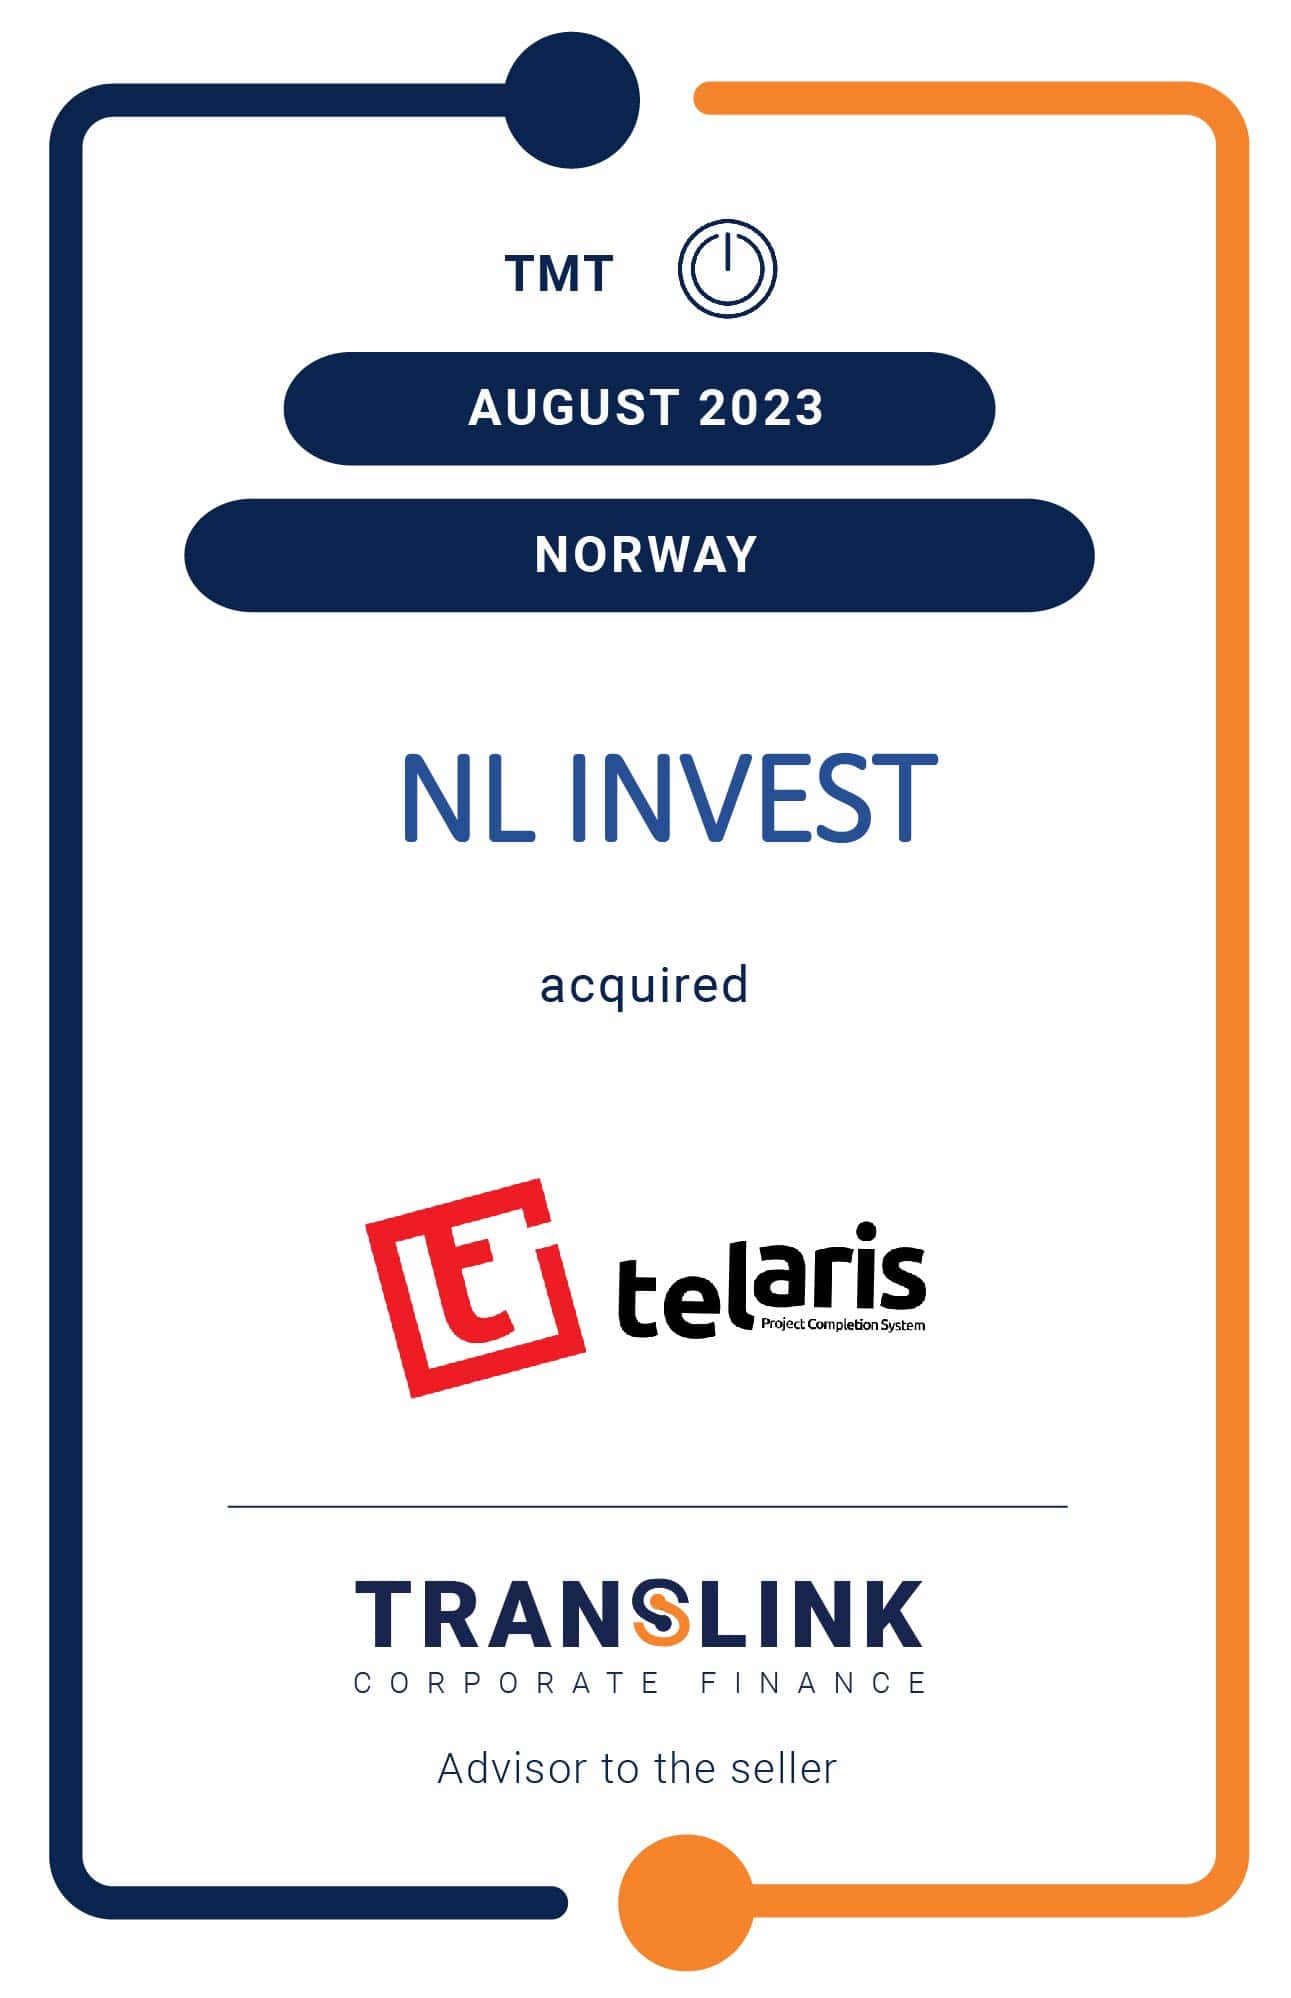 Translink Corporate Finance Acted As The Advisor To Telaris AS In Its Private Placement And Minority Stake Sale To NL Invest